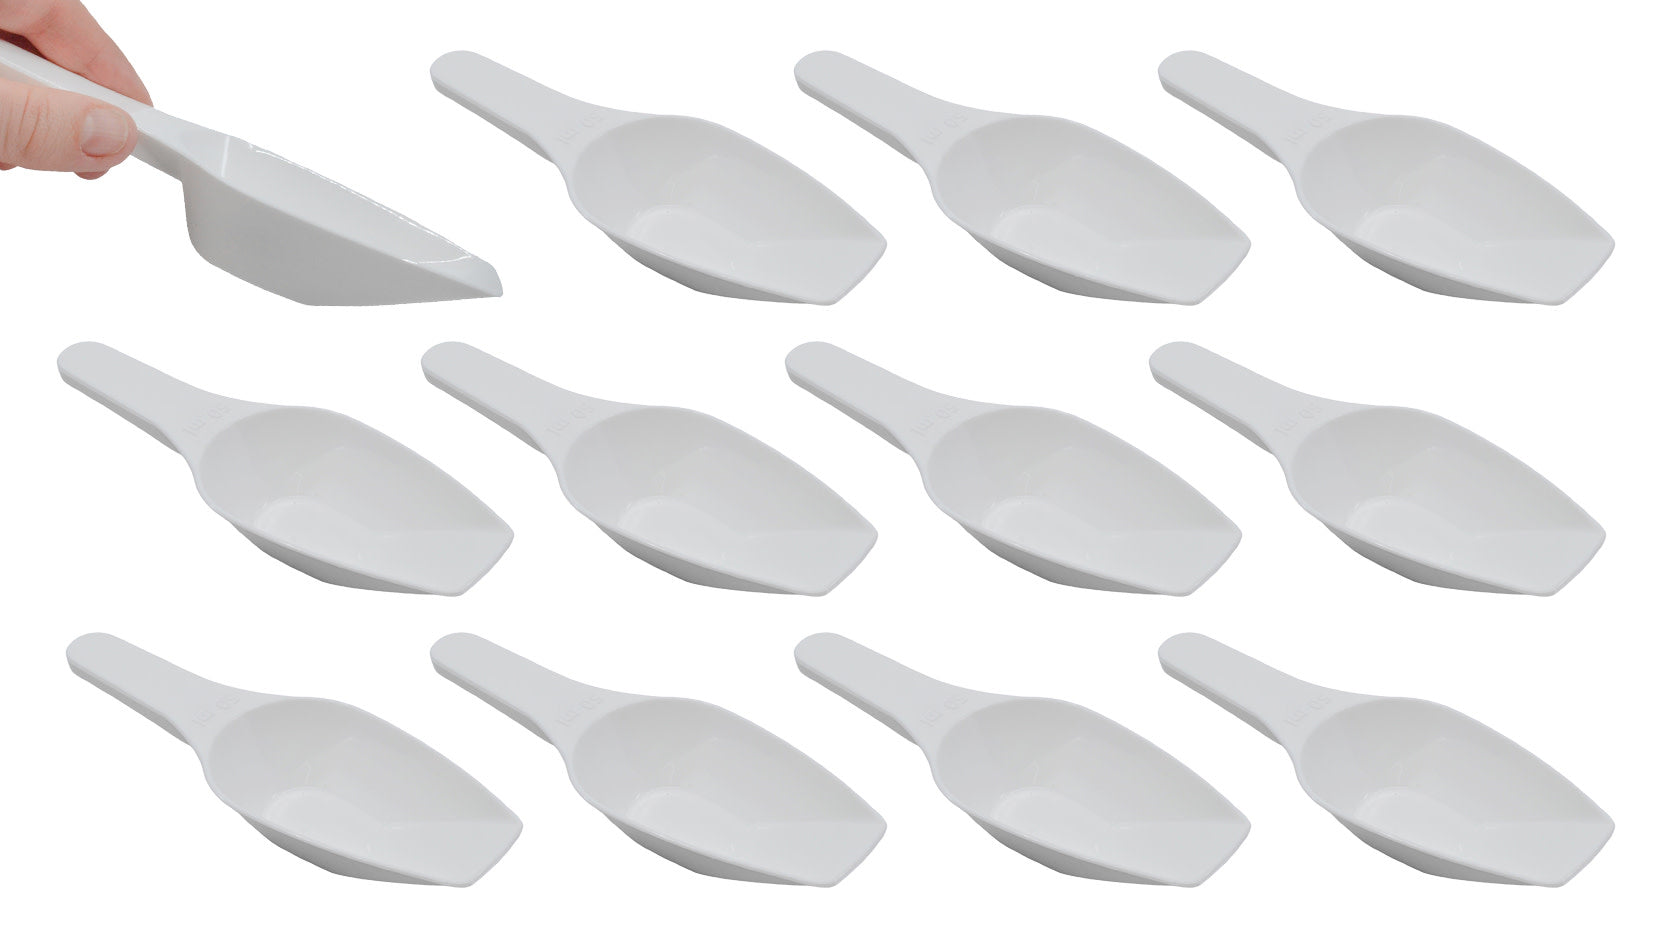 12PK Scoops, 50ml (1.7oz) - Polypropylene - Flat Bottom, Excellent for Measuring & Weighing